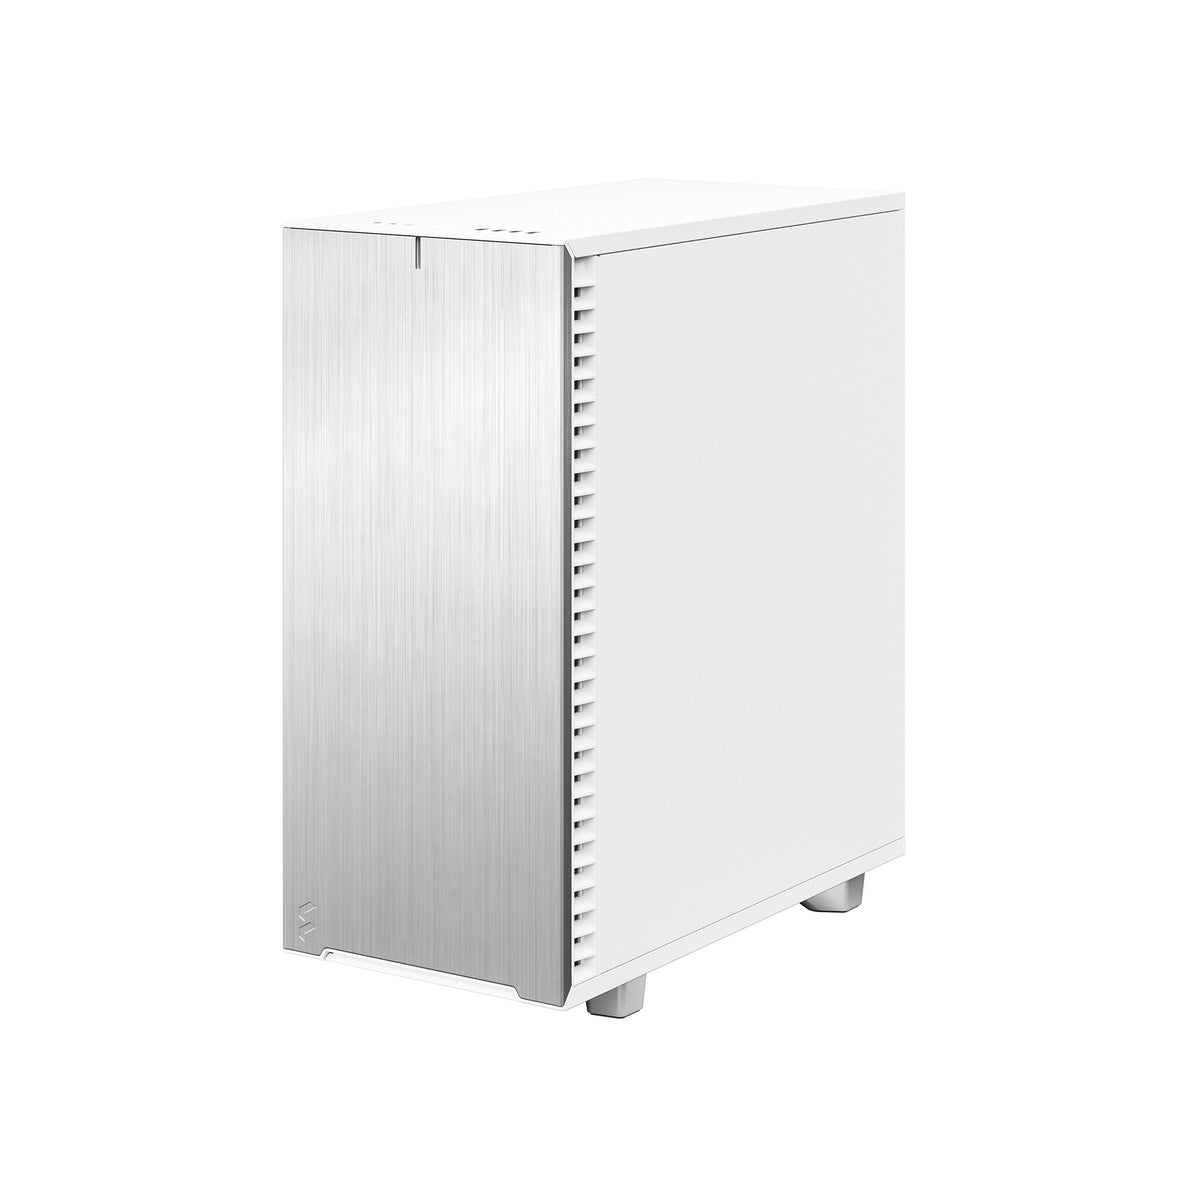 Fractal Design Define 7 Compact - ATX Mid Tower Case in White